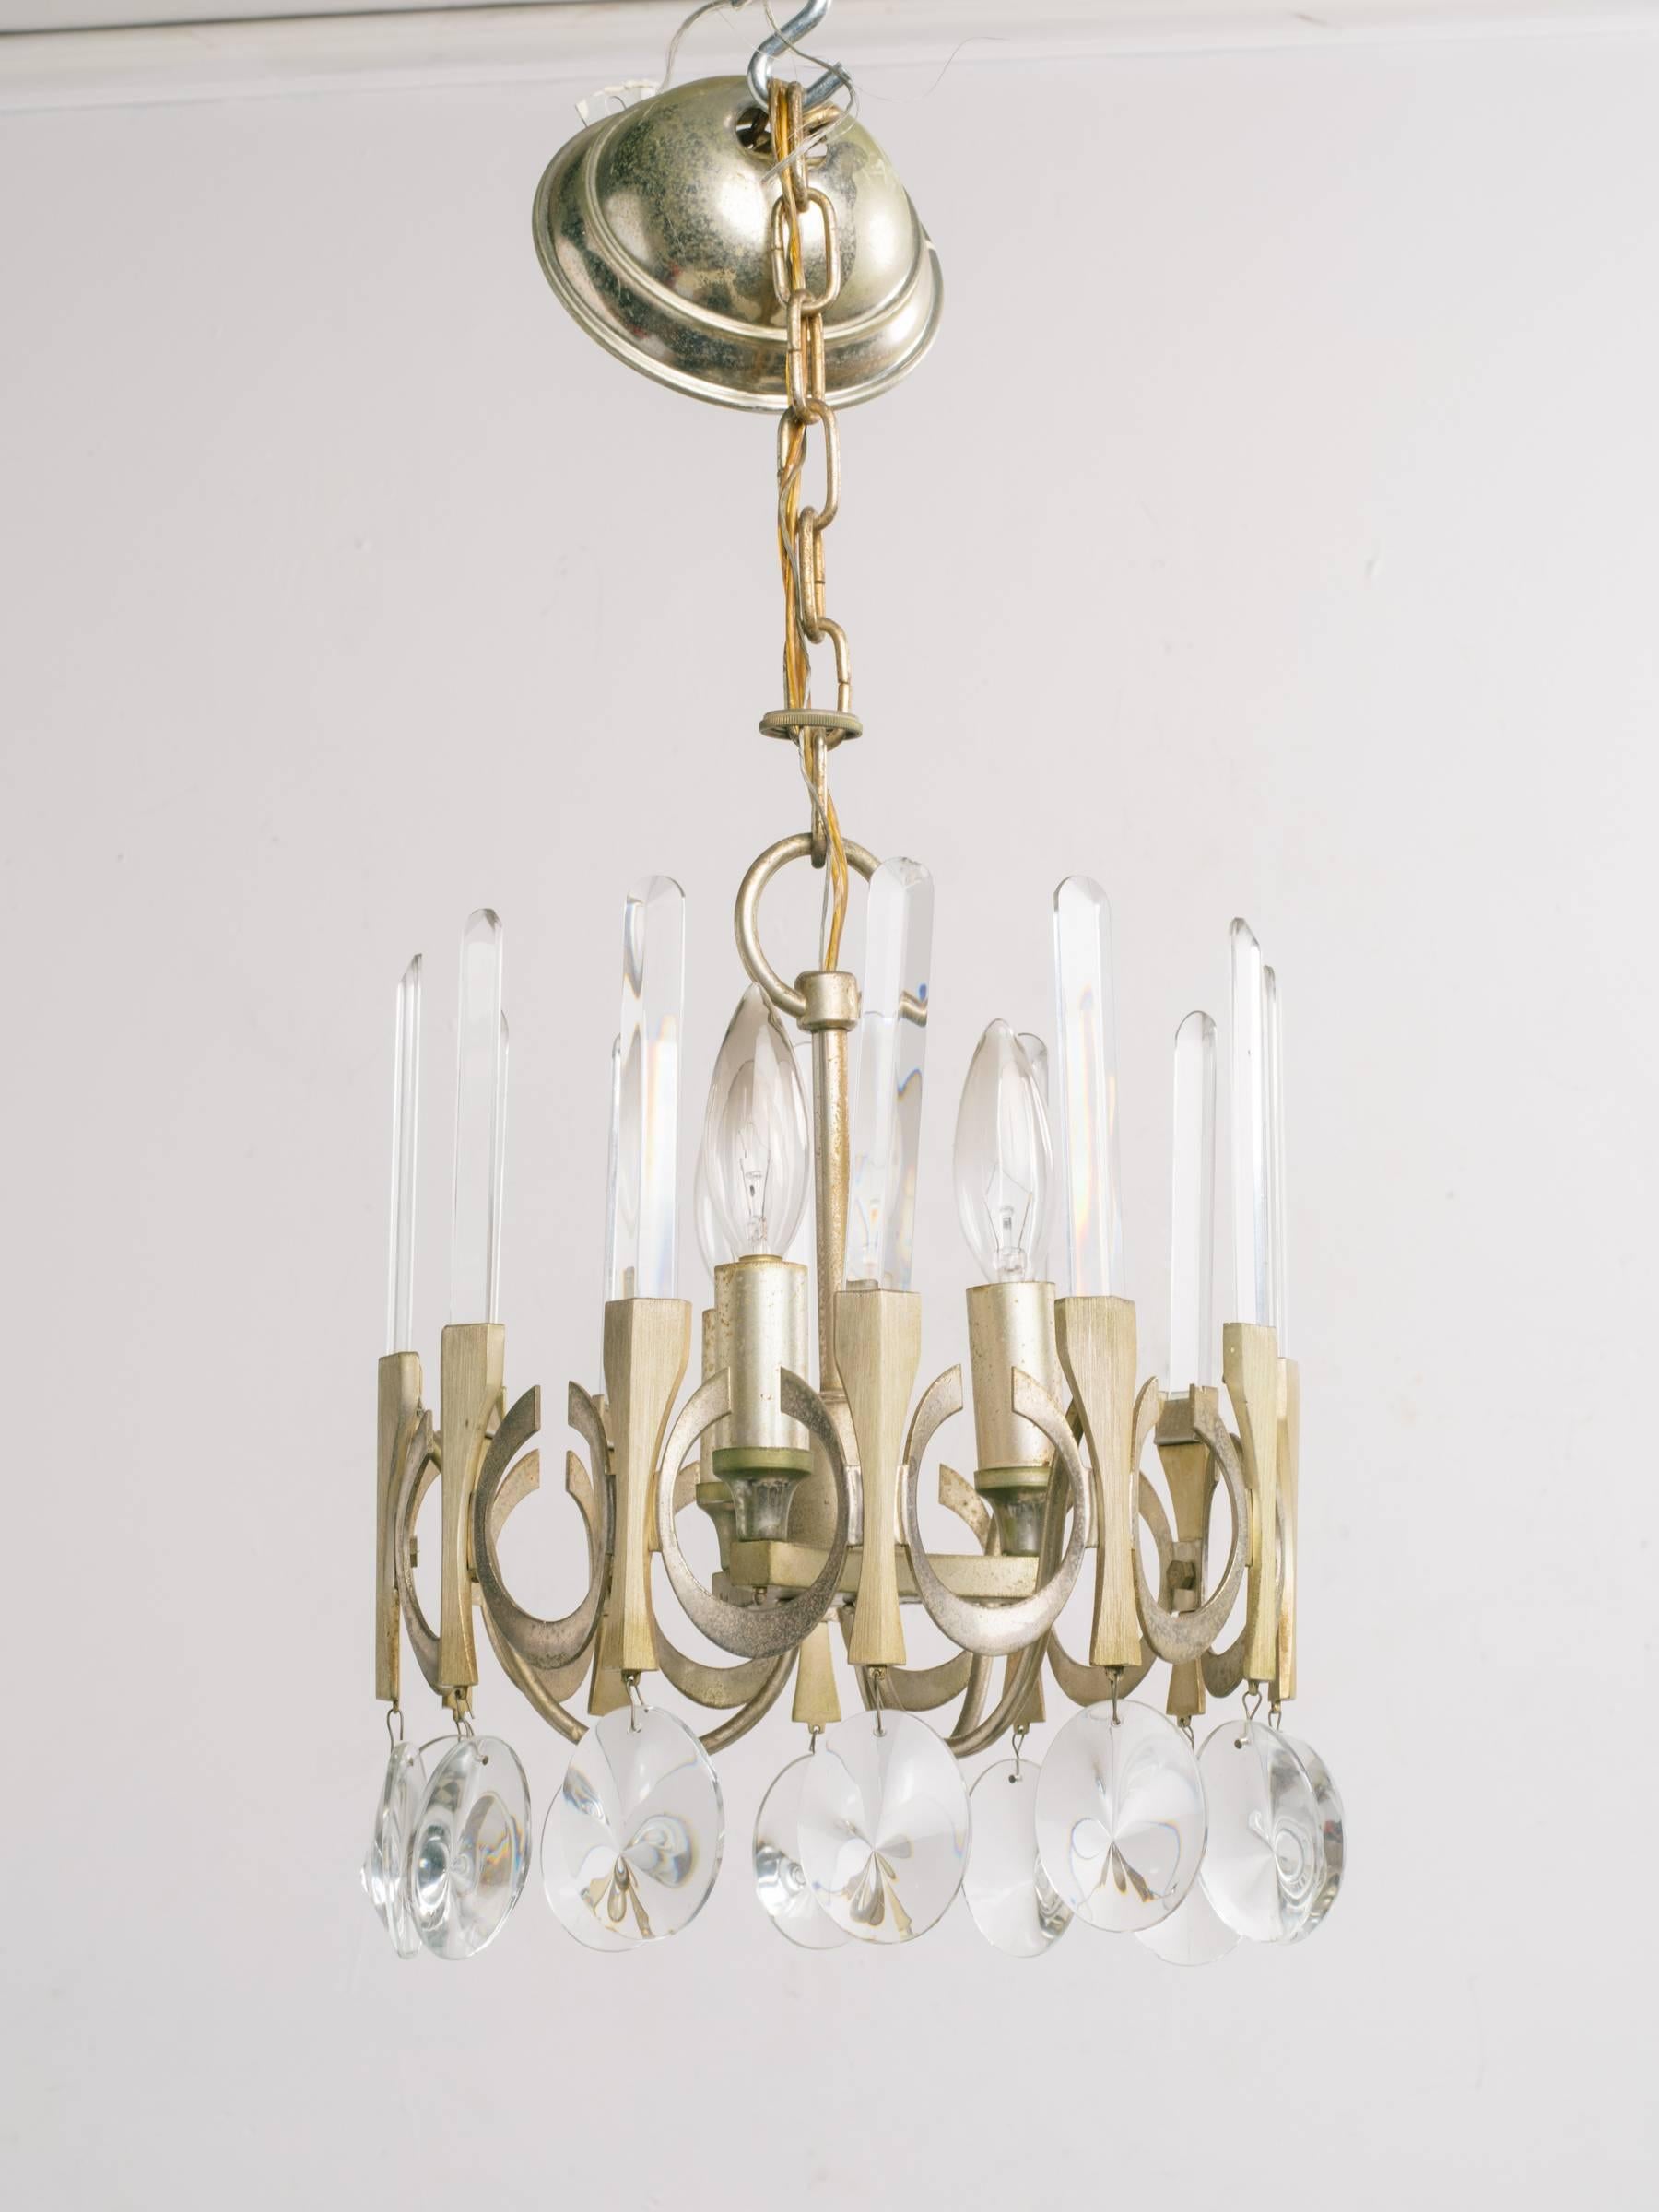 Scolari 1970s Crystal/Metal Chandelier In Fair Condition For Sale In Tarrytown, NY